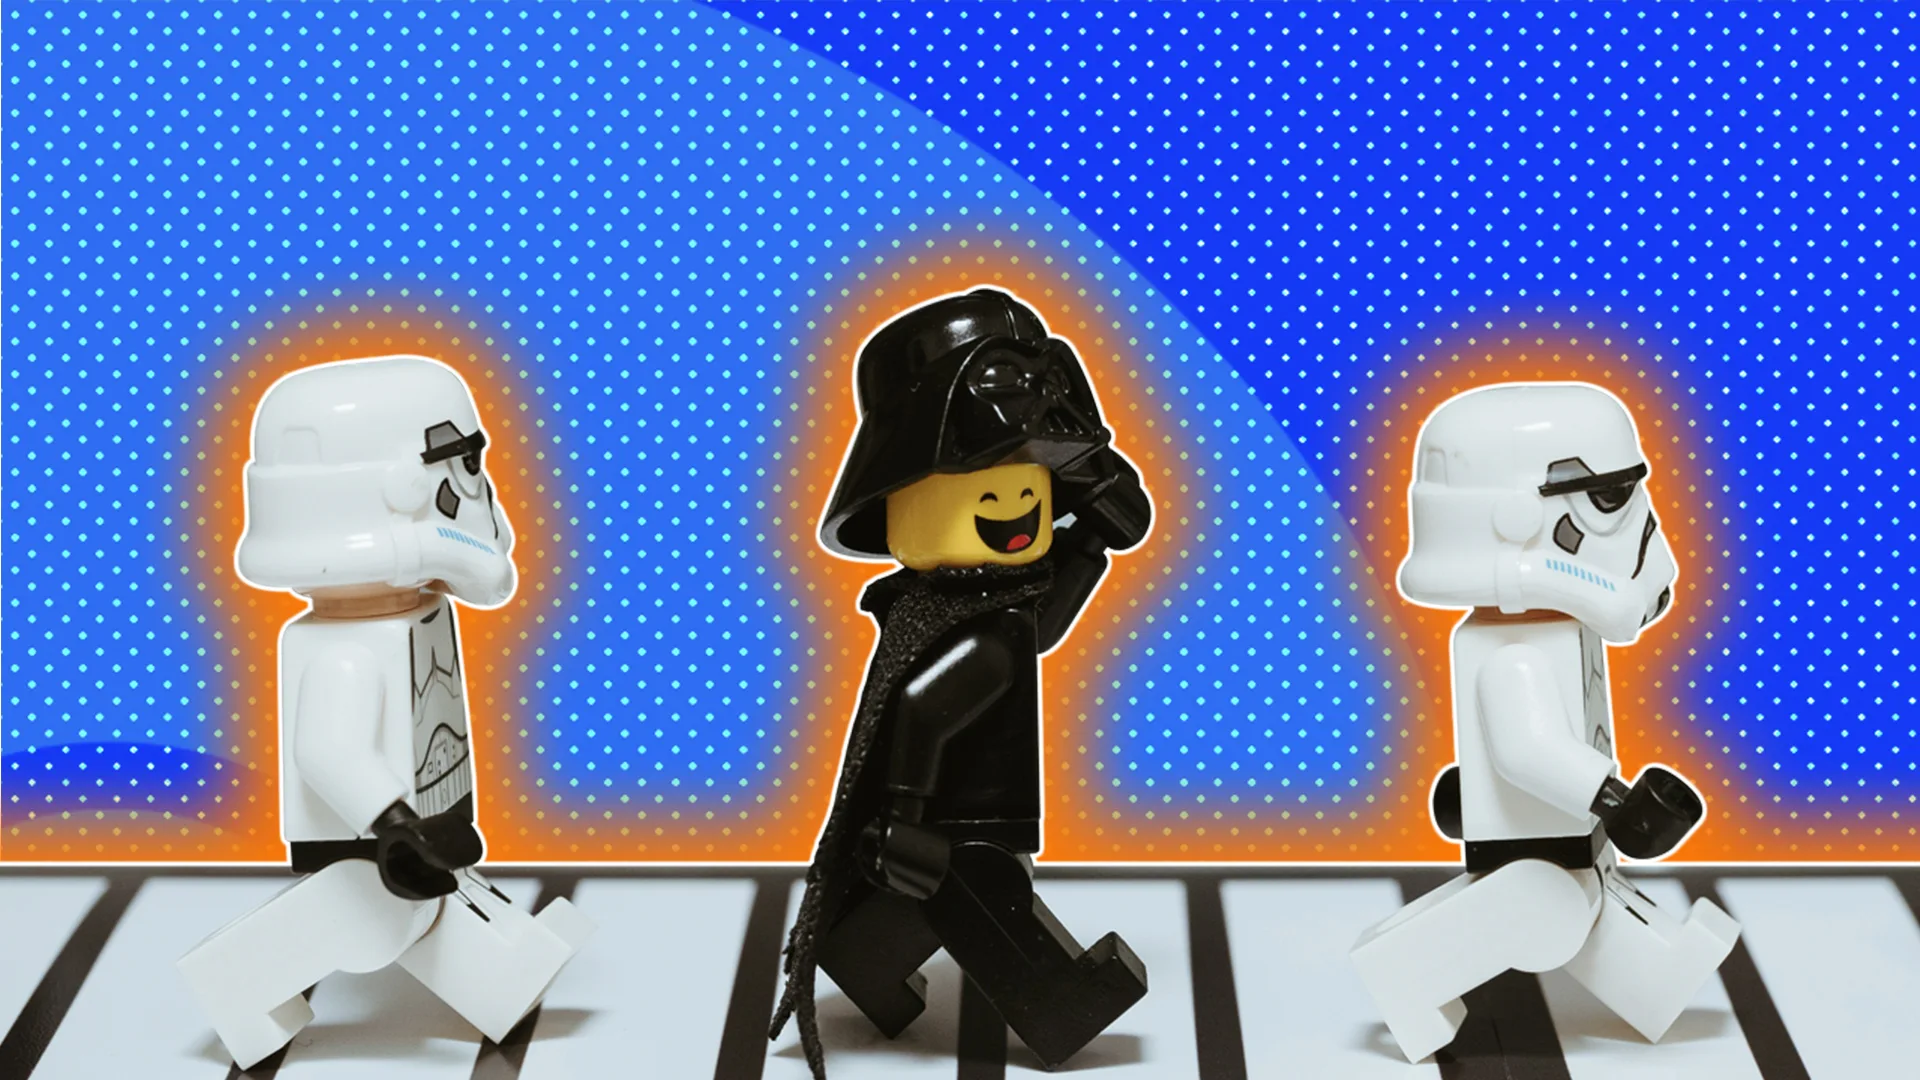 Lego Star Wars characters crossing the road with a polkadot background and a glow around the image